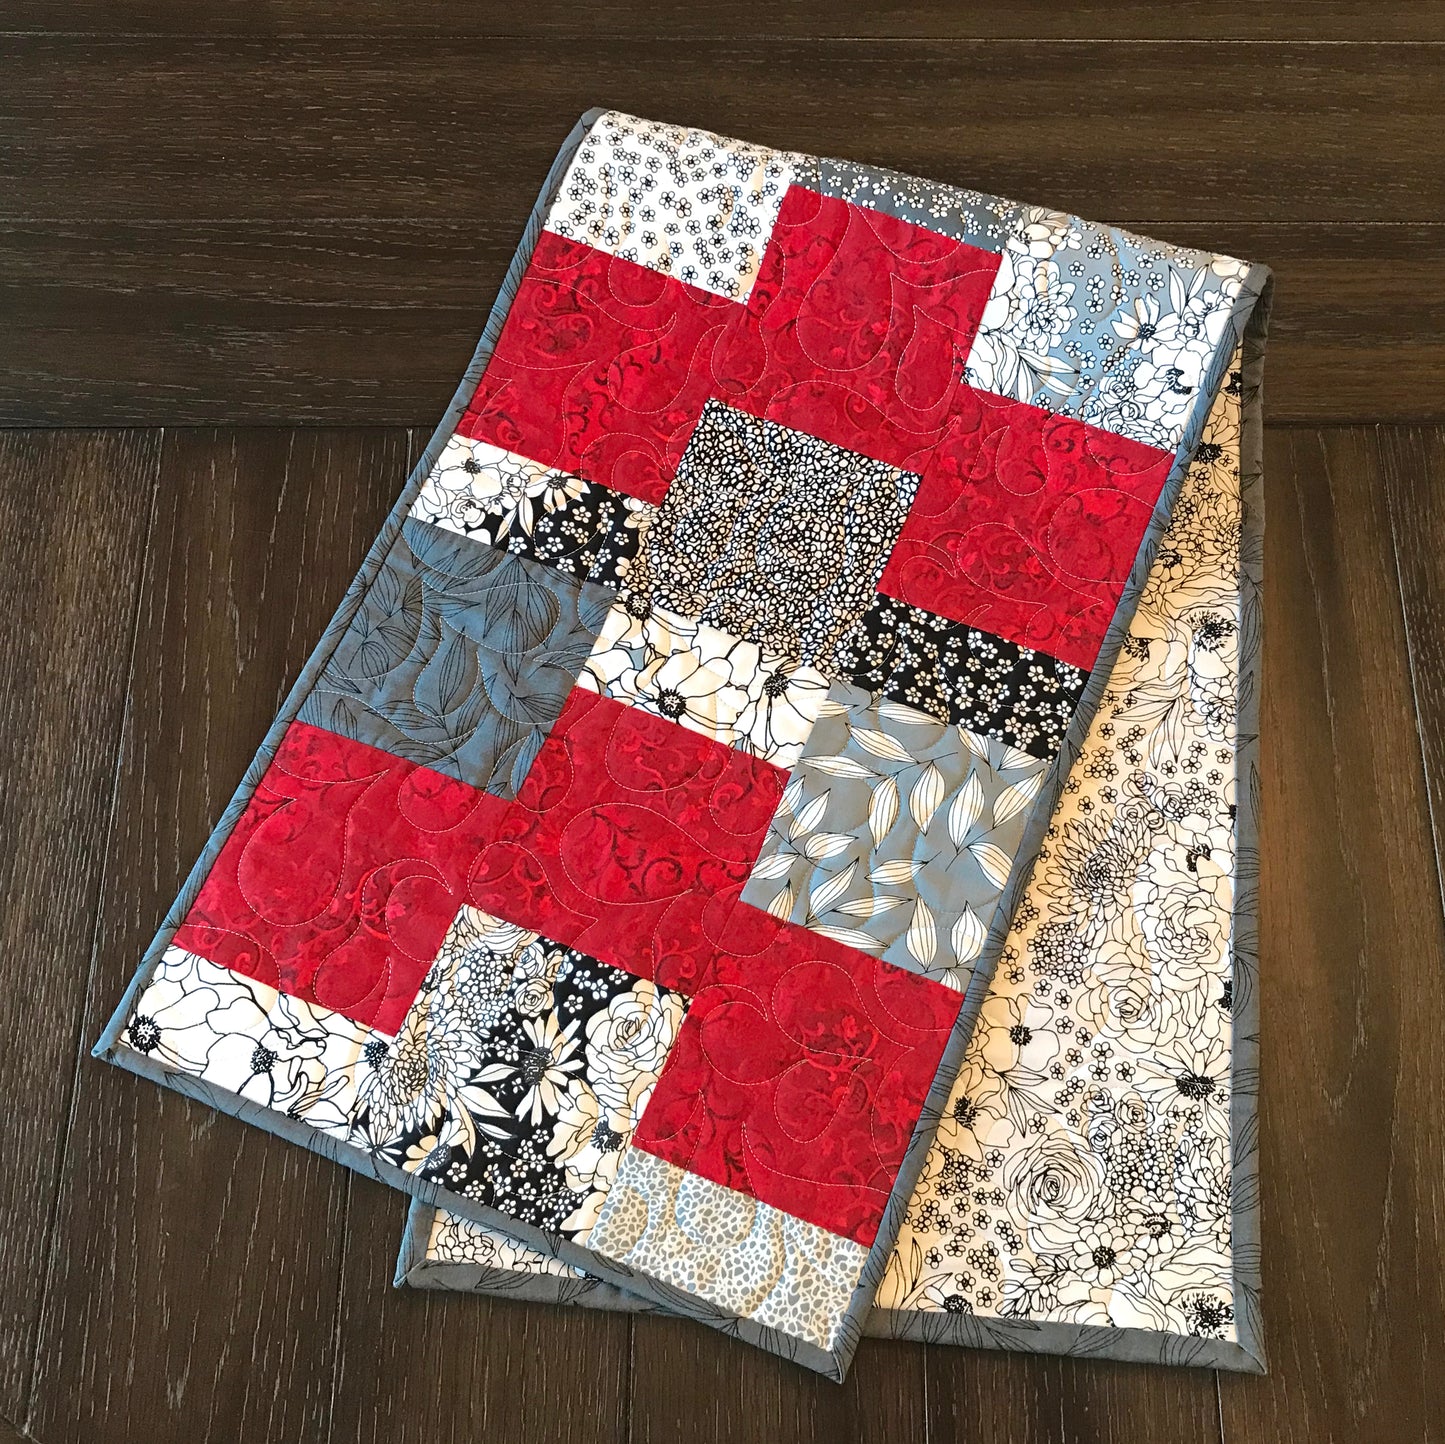 Gray and Red Patchwork Table Runner - Handmade Quilts, Digital Patterns, and Home Décor items online - Cuddle Cat Quiltworks